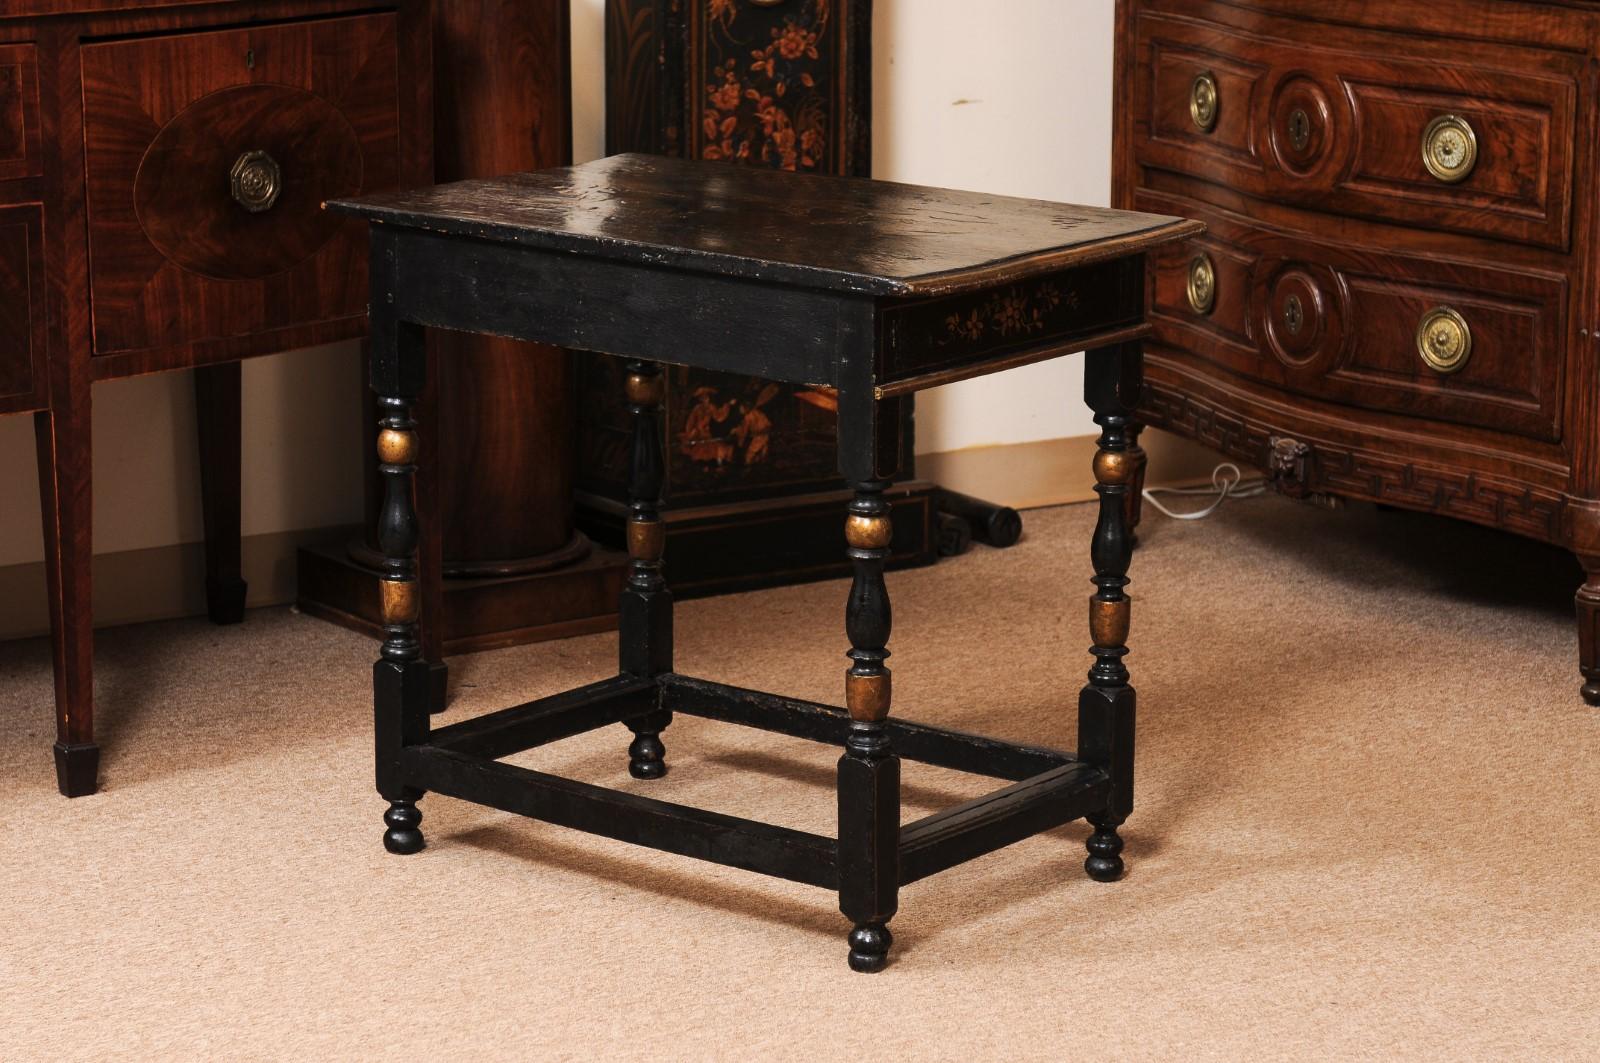 18th Century English Chinoiserie Decorated Side Table with Drawer, Turned Legs & For Sale 1